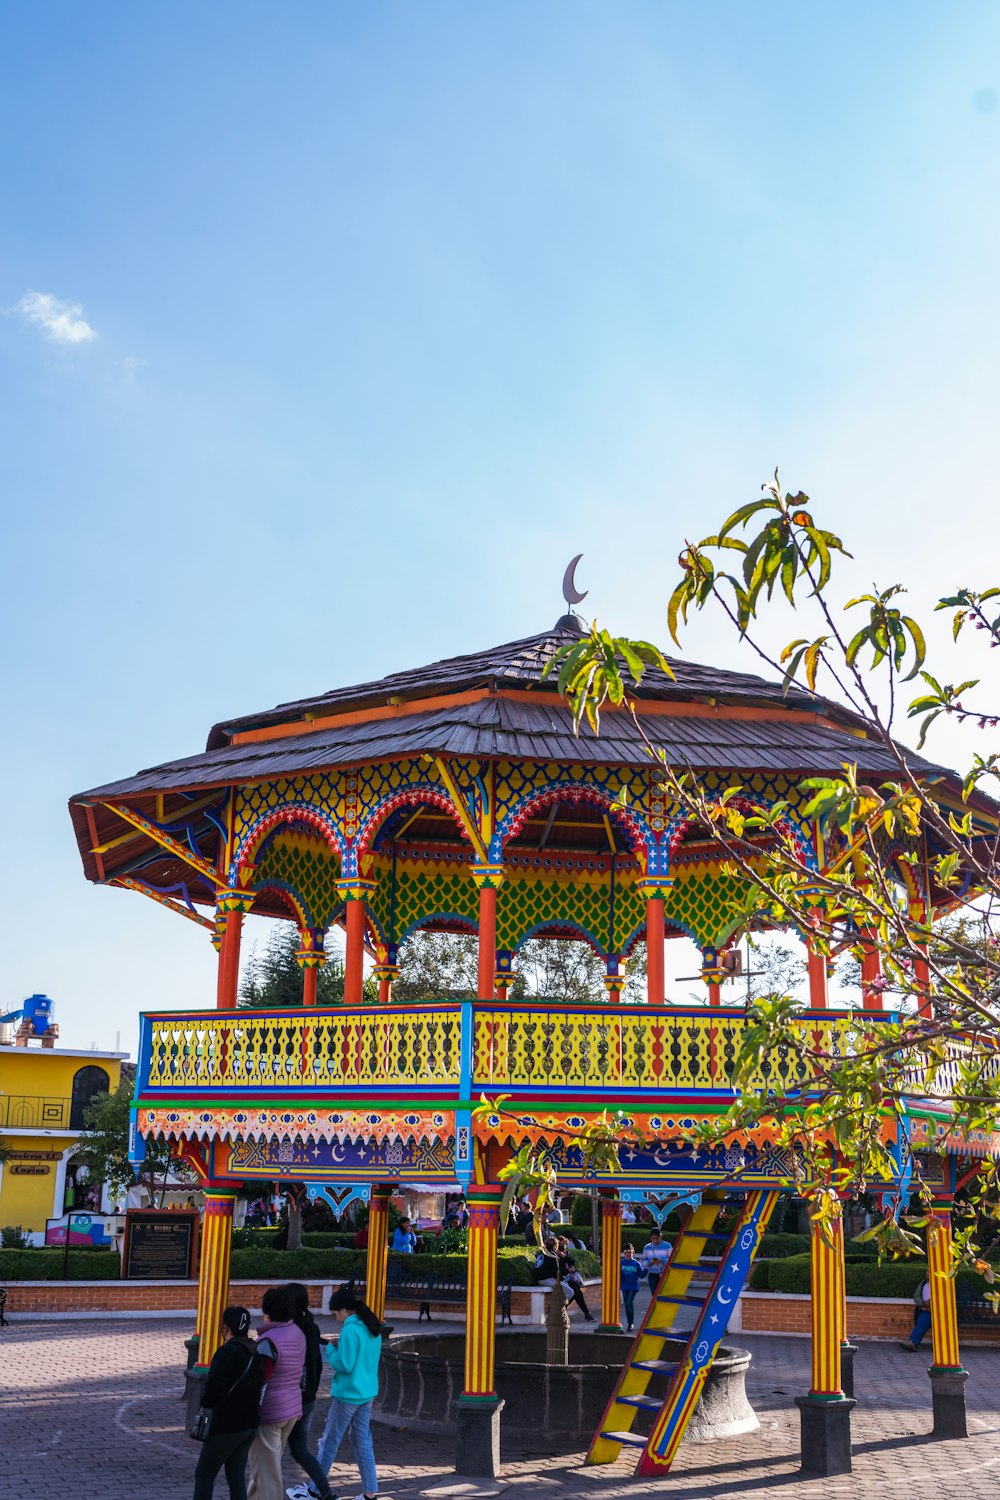 a colorful gazebo with a slide in the middle of it